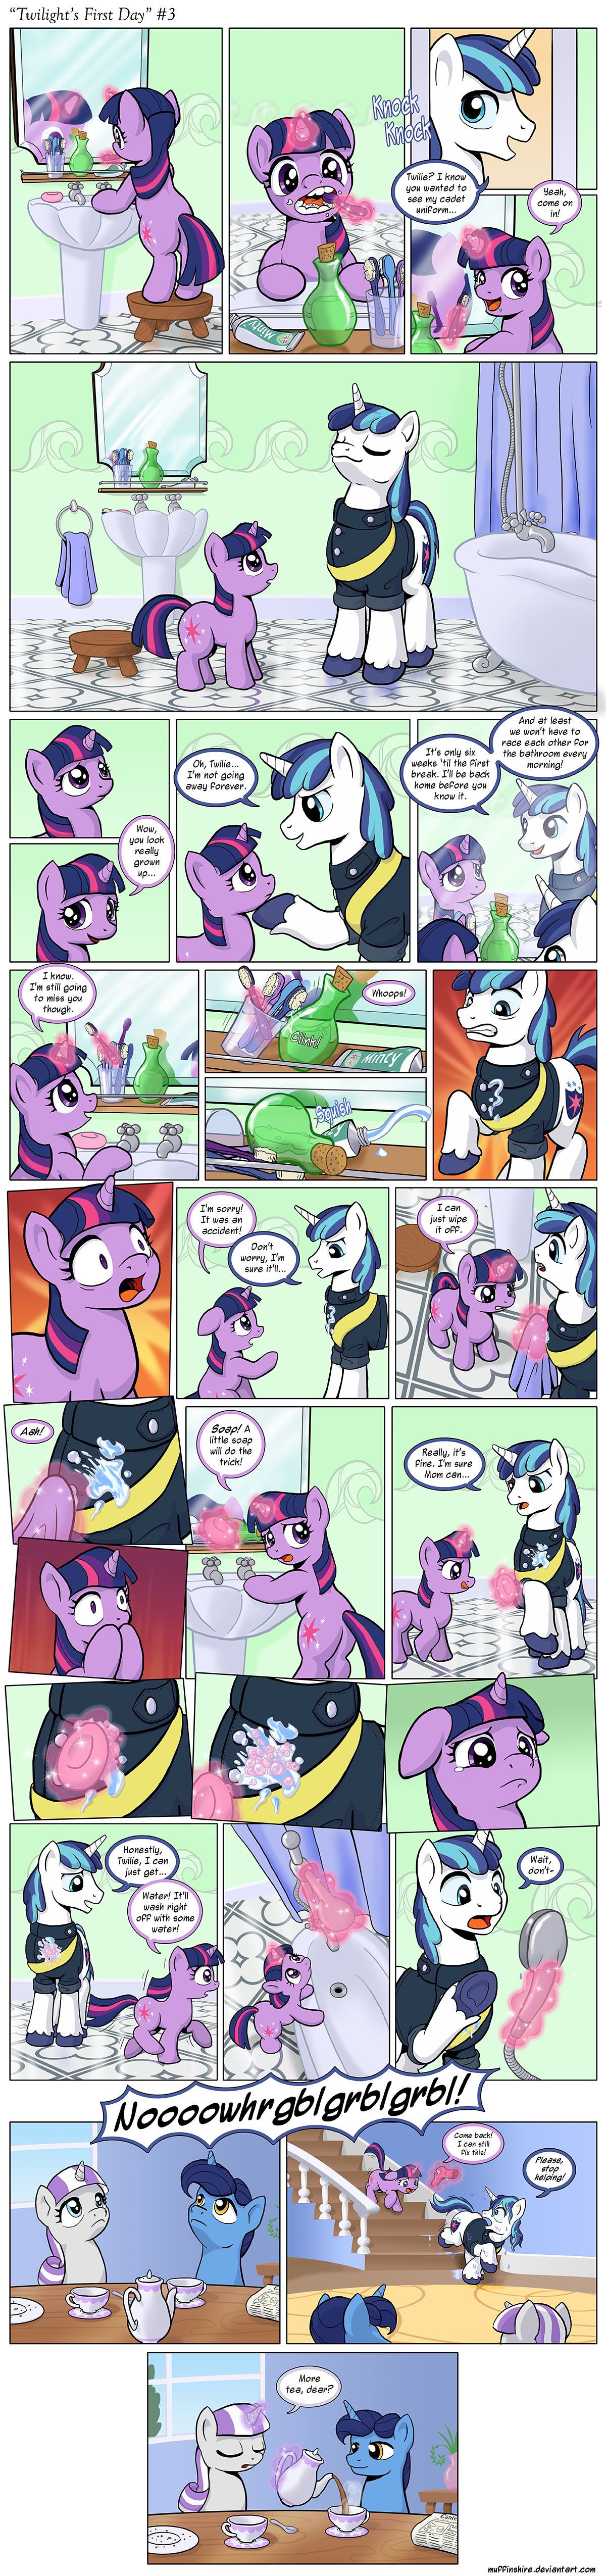 [Muffinshire] Twilight's First Day (My Little Pony: Friendship is Magic) [English] 3